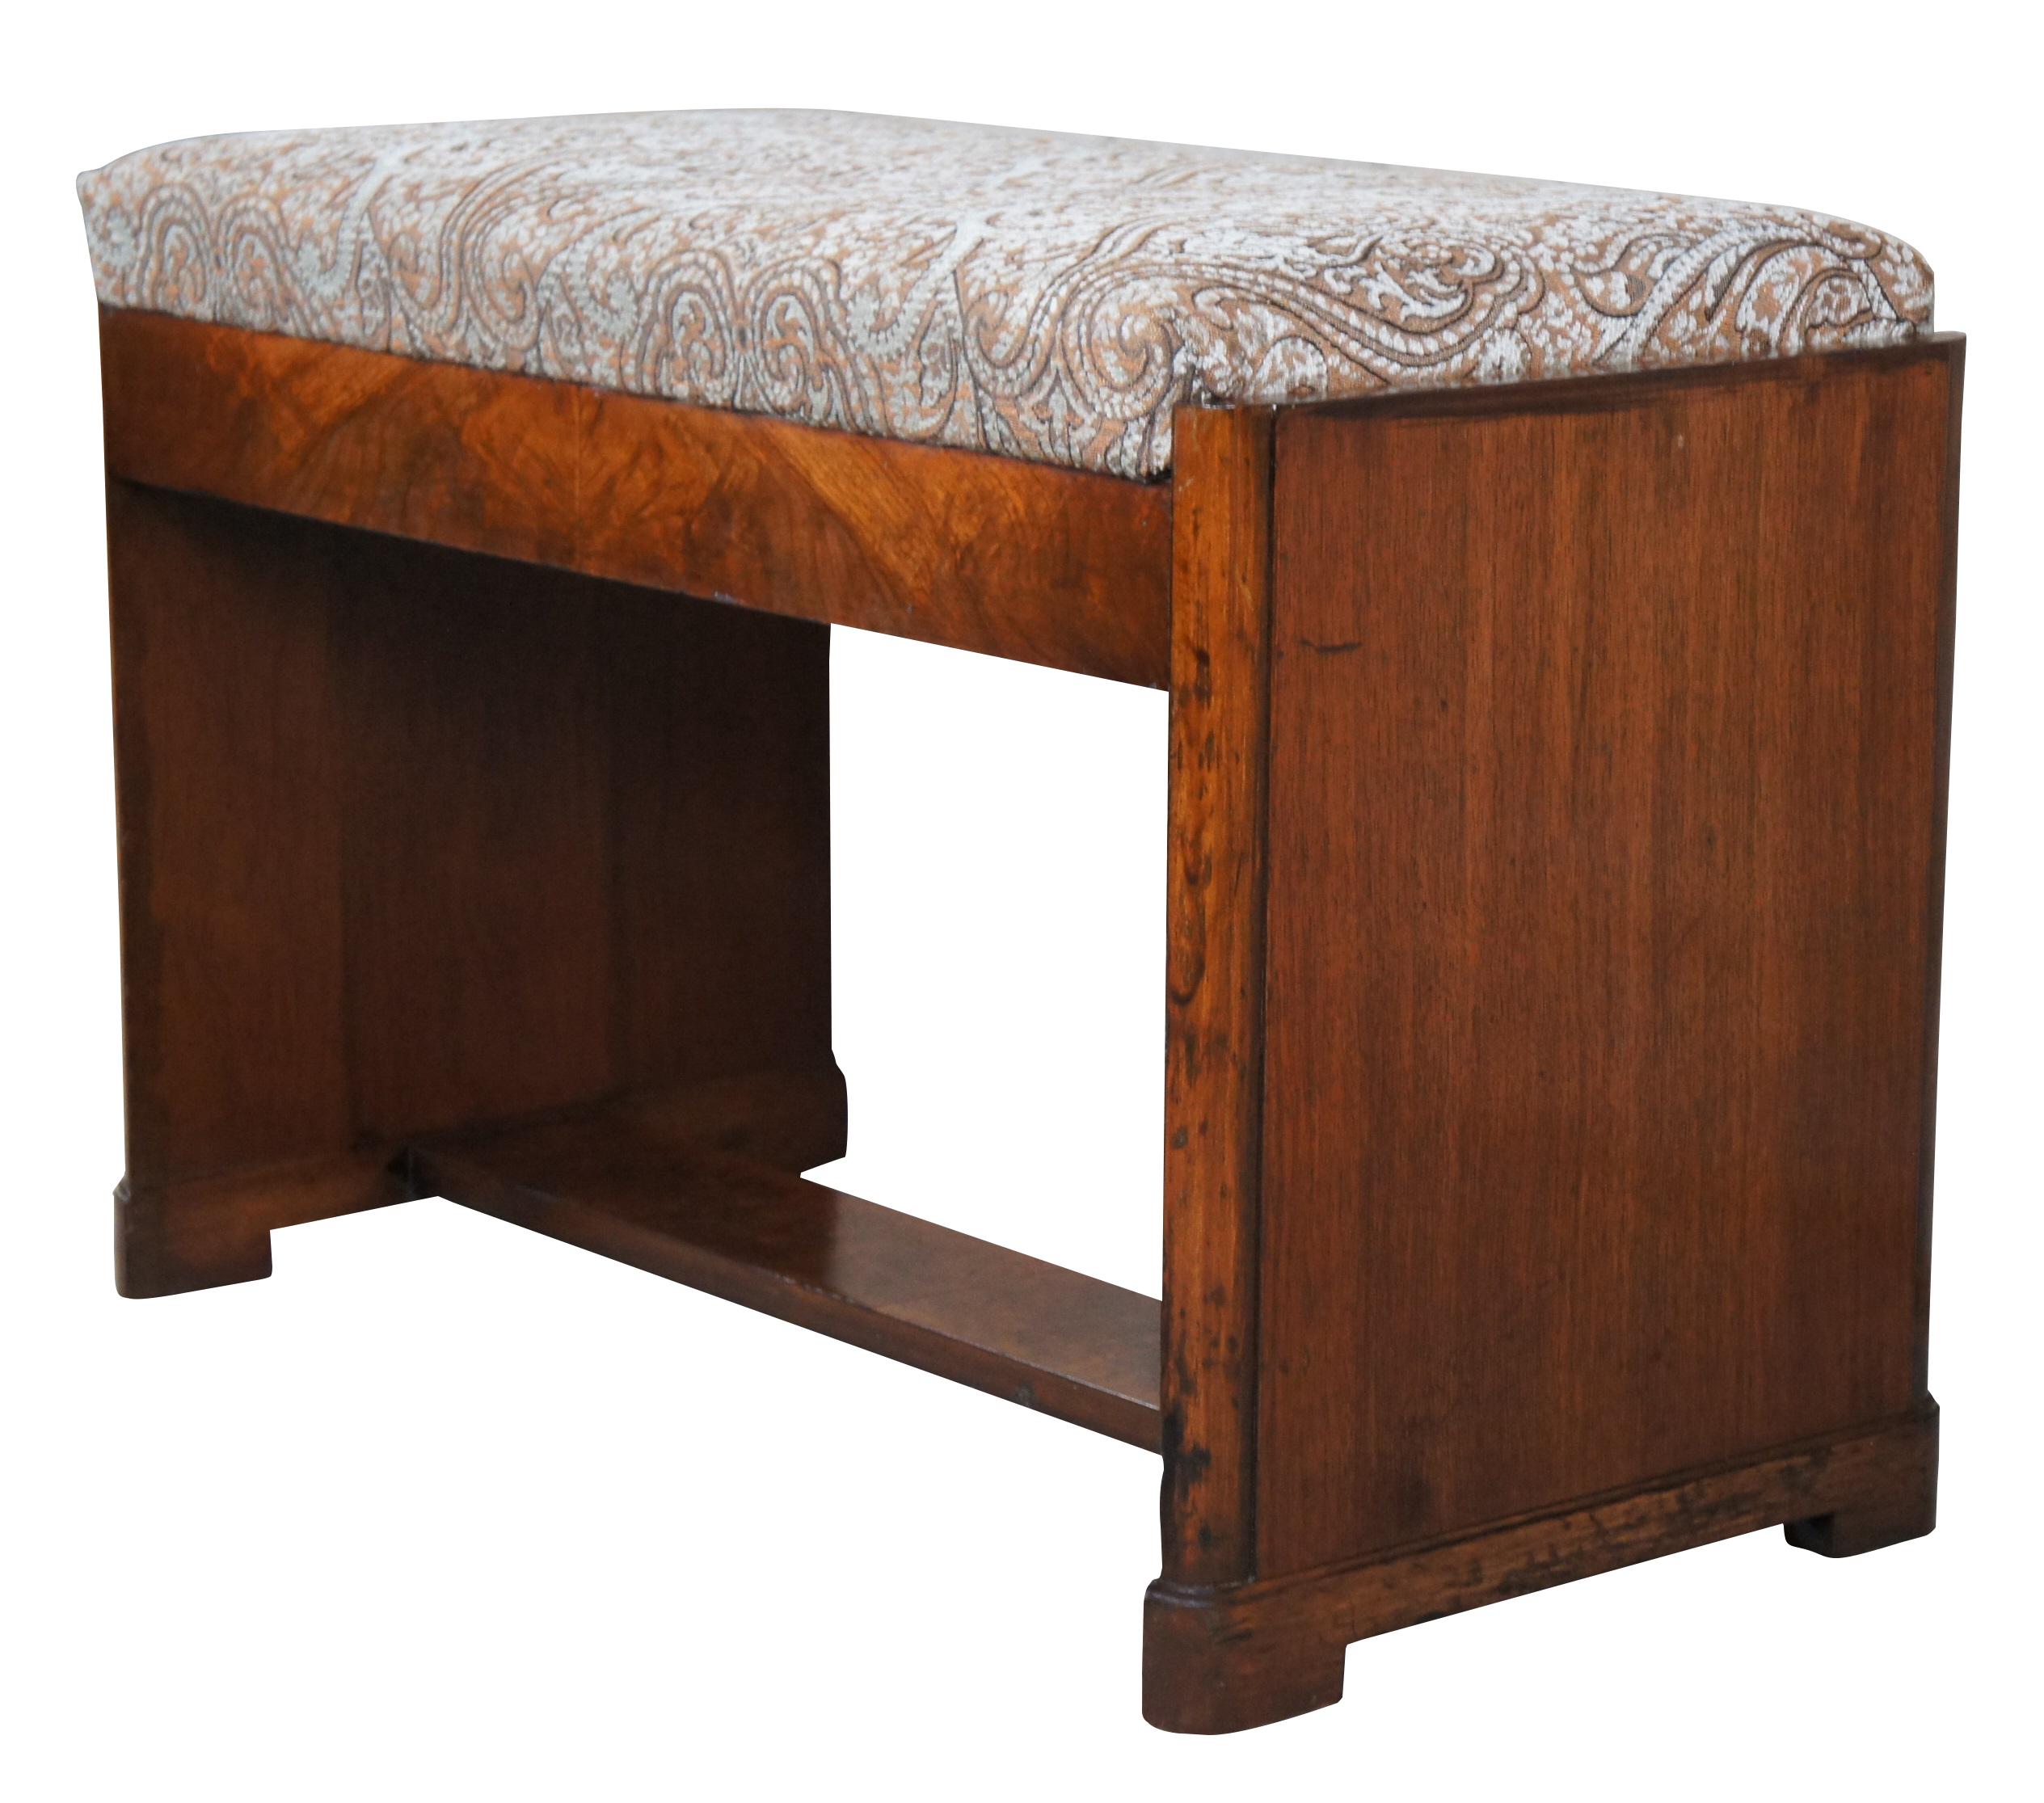 A beautiful art deco vanity bench or piano stool. Made from walnut with matchbook veneer along the front. Features a trestle form with paisley upholstered top that opens to a divided storage compartment.

